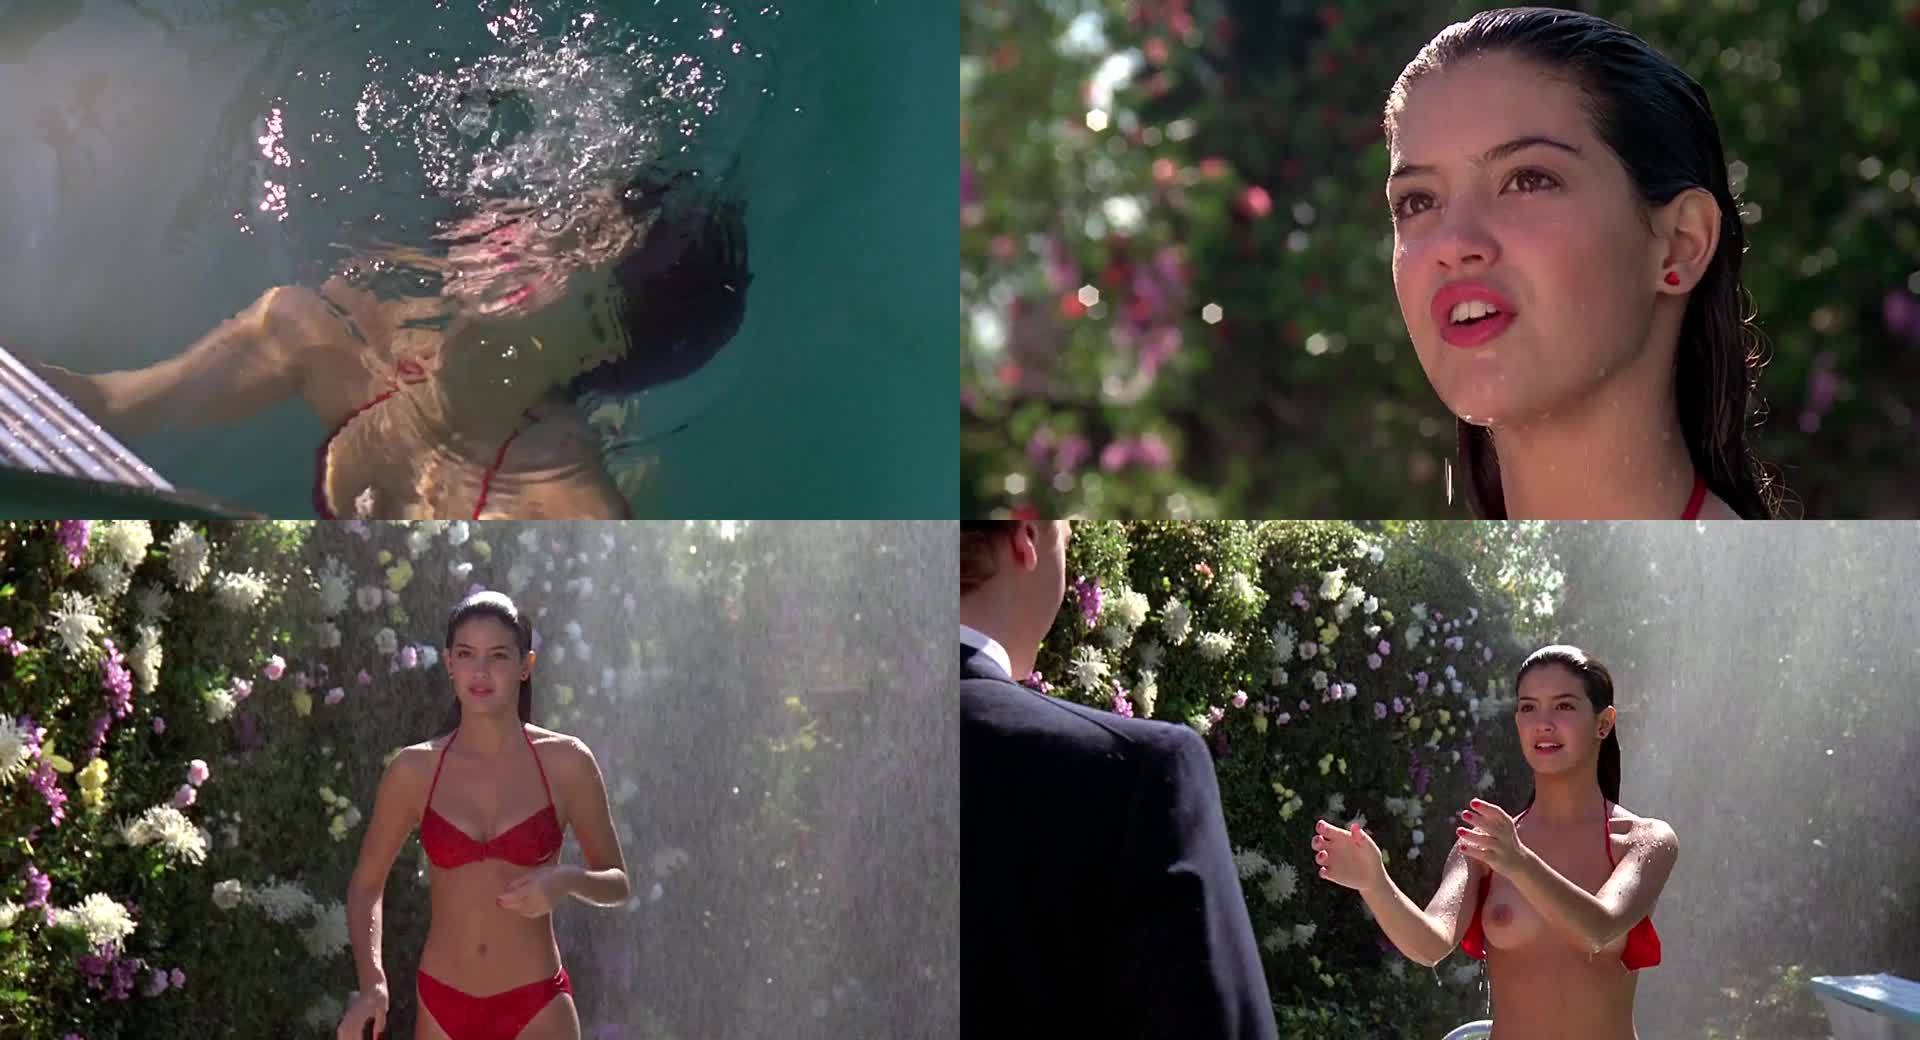 Phoebe Cates plot from Fast Times at Ridgemont High.